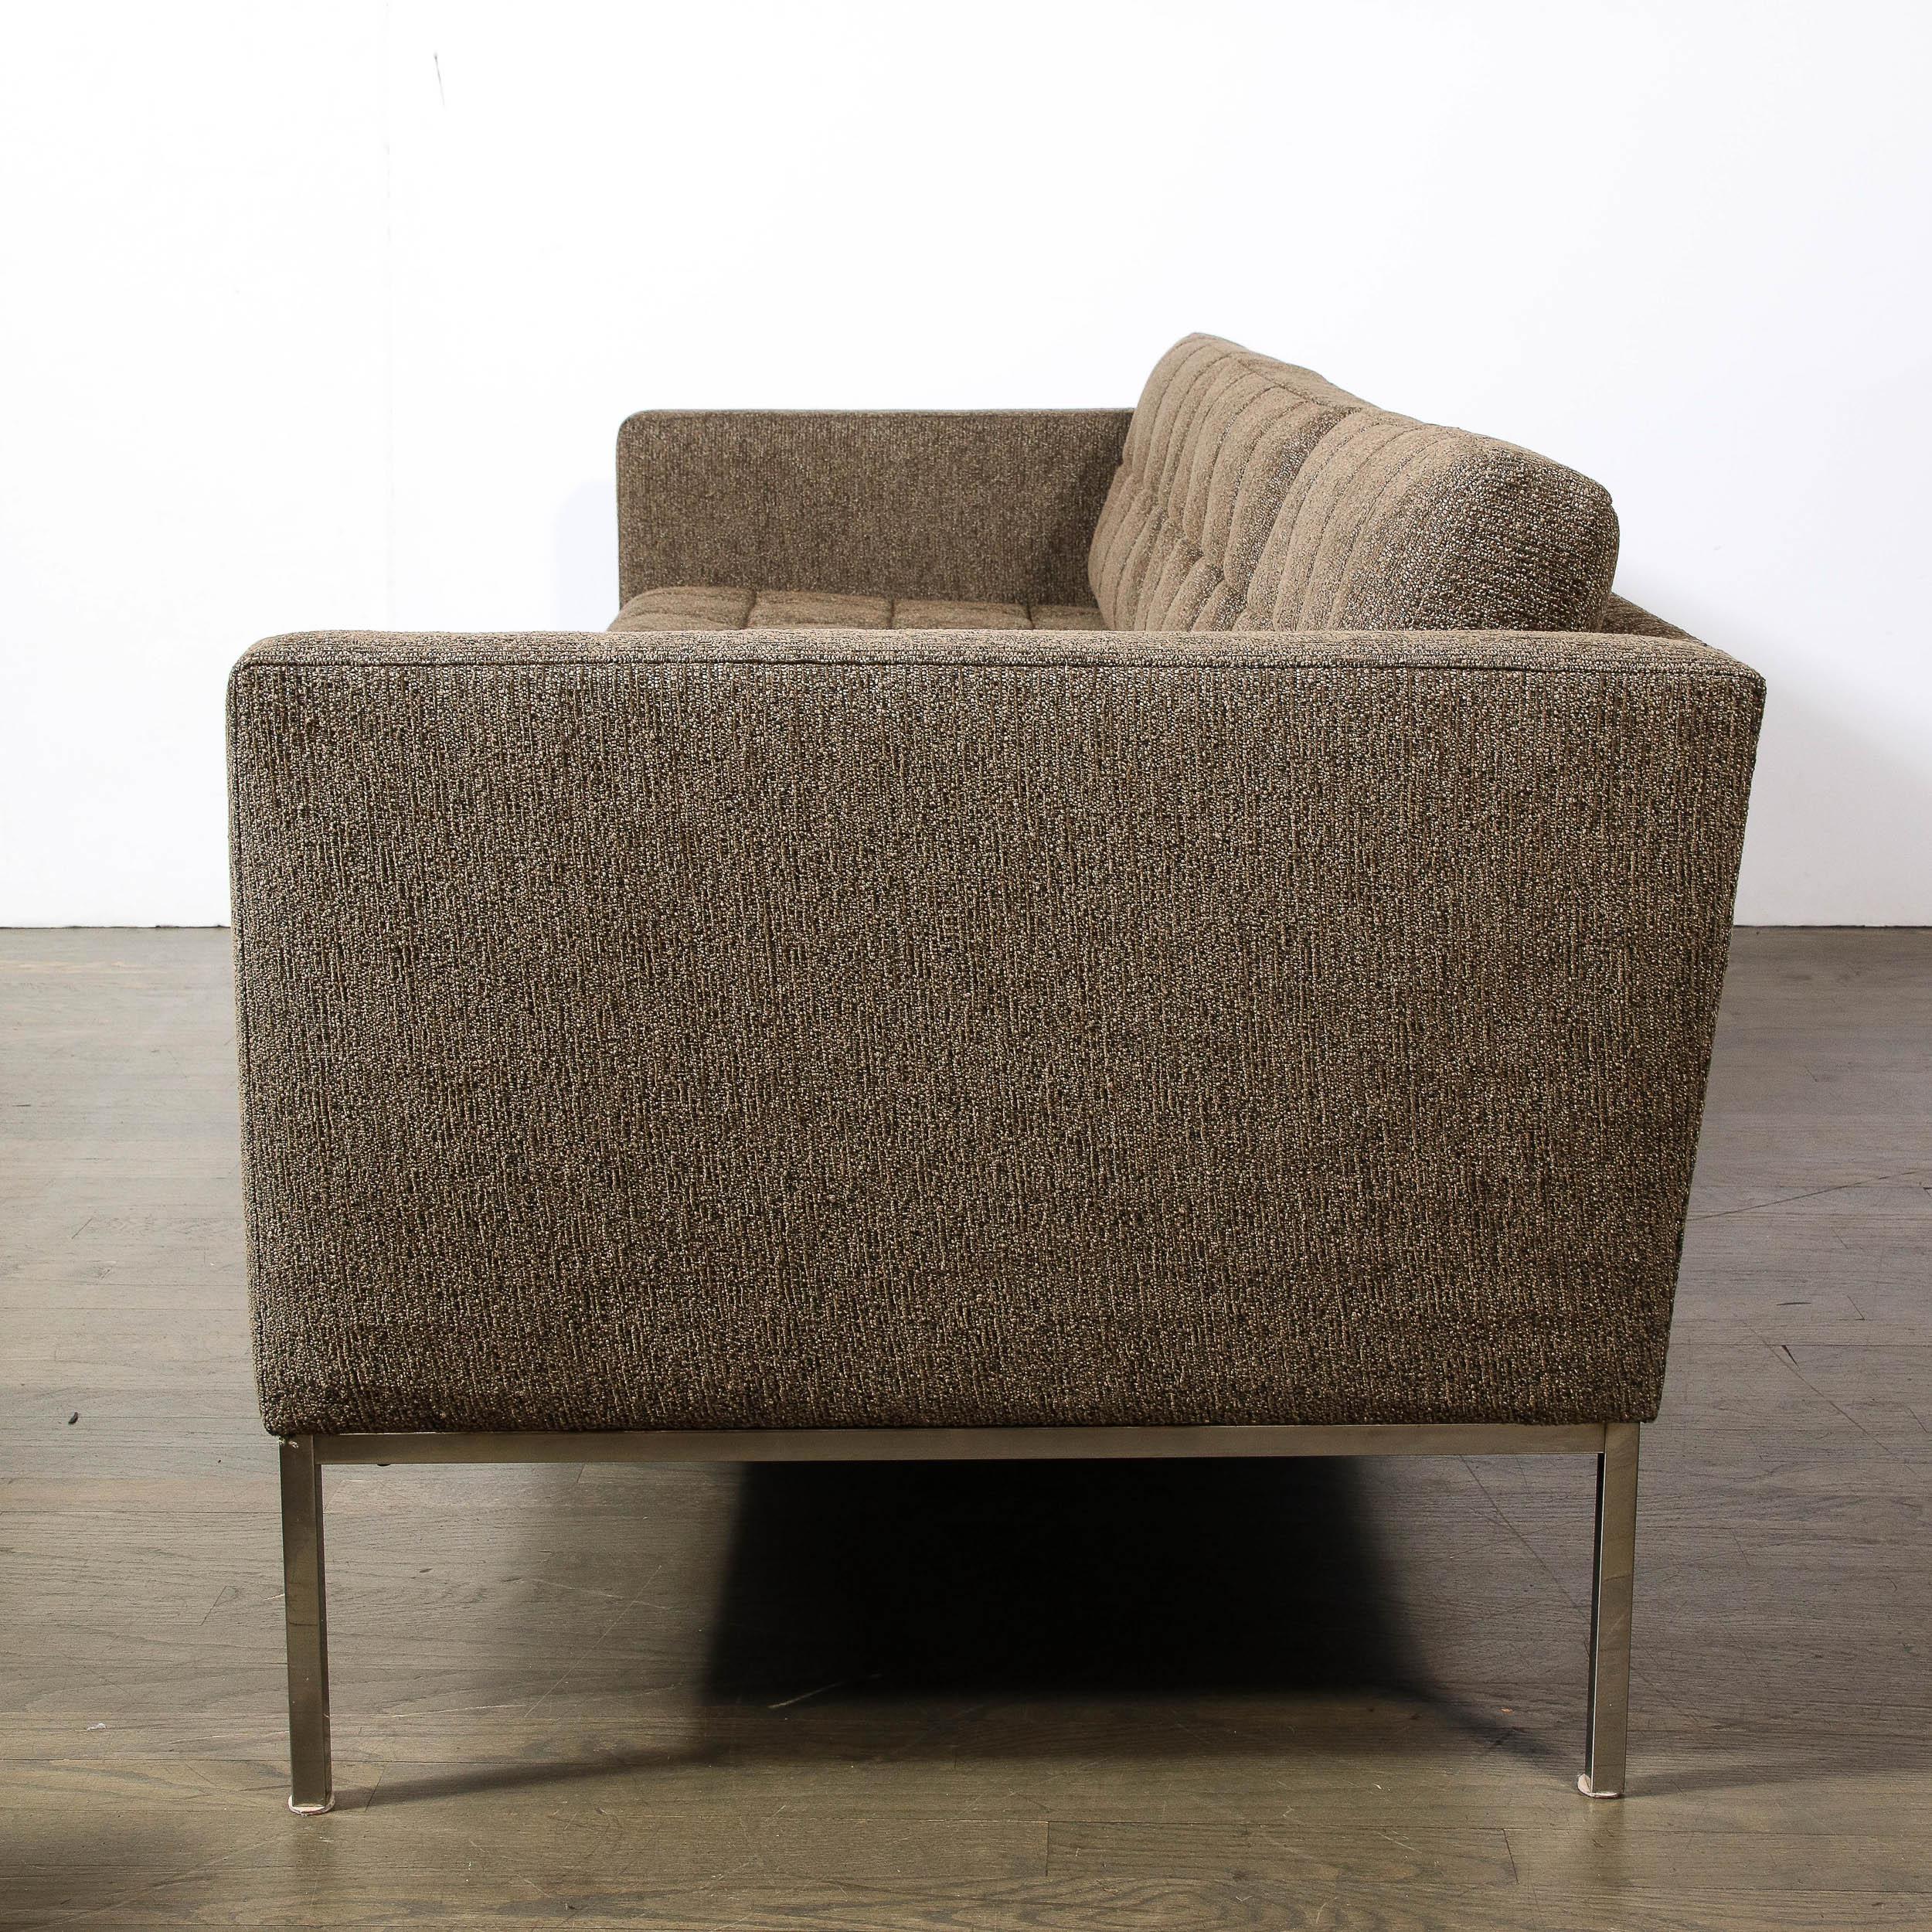 Contemporary Modernist Biscuit Tufted 'Relaxed' Sofa in Holly Hunt Fabric by Florence Knoll  For Sale